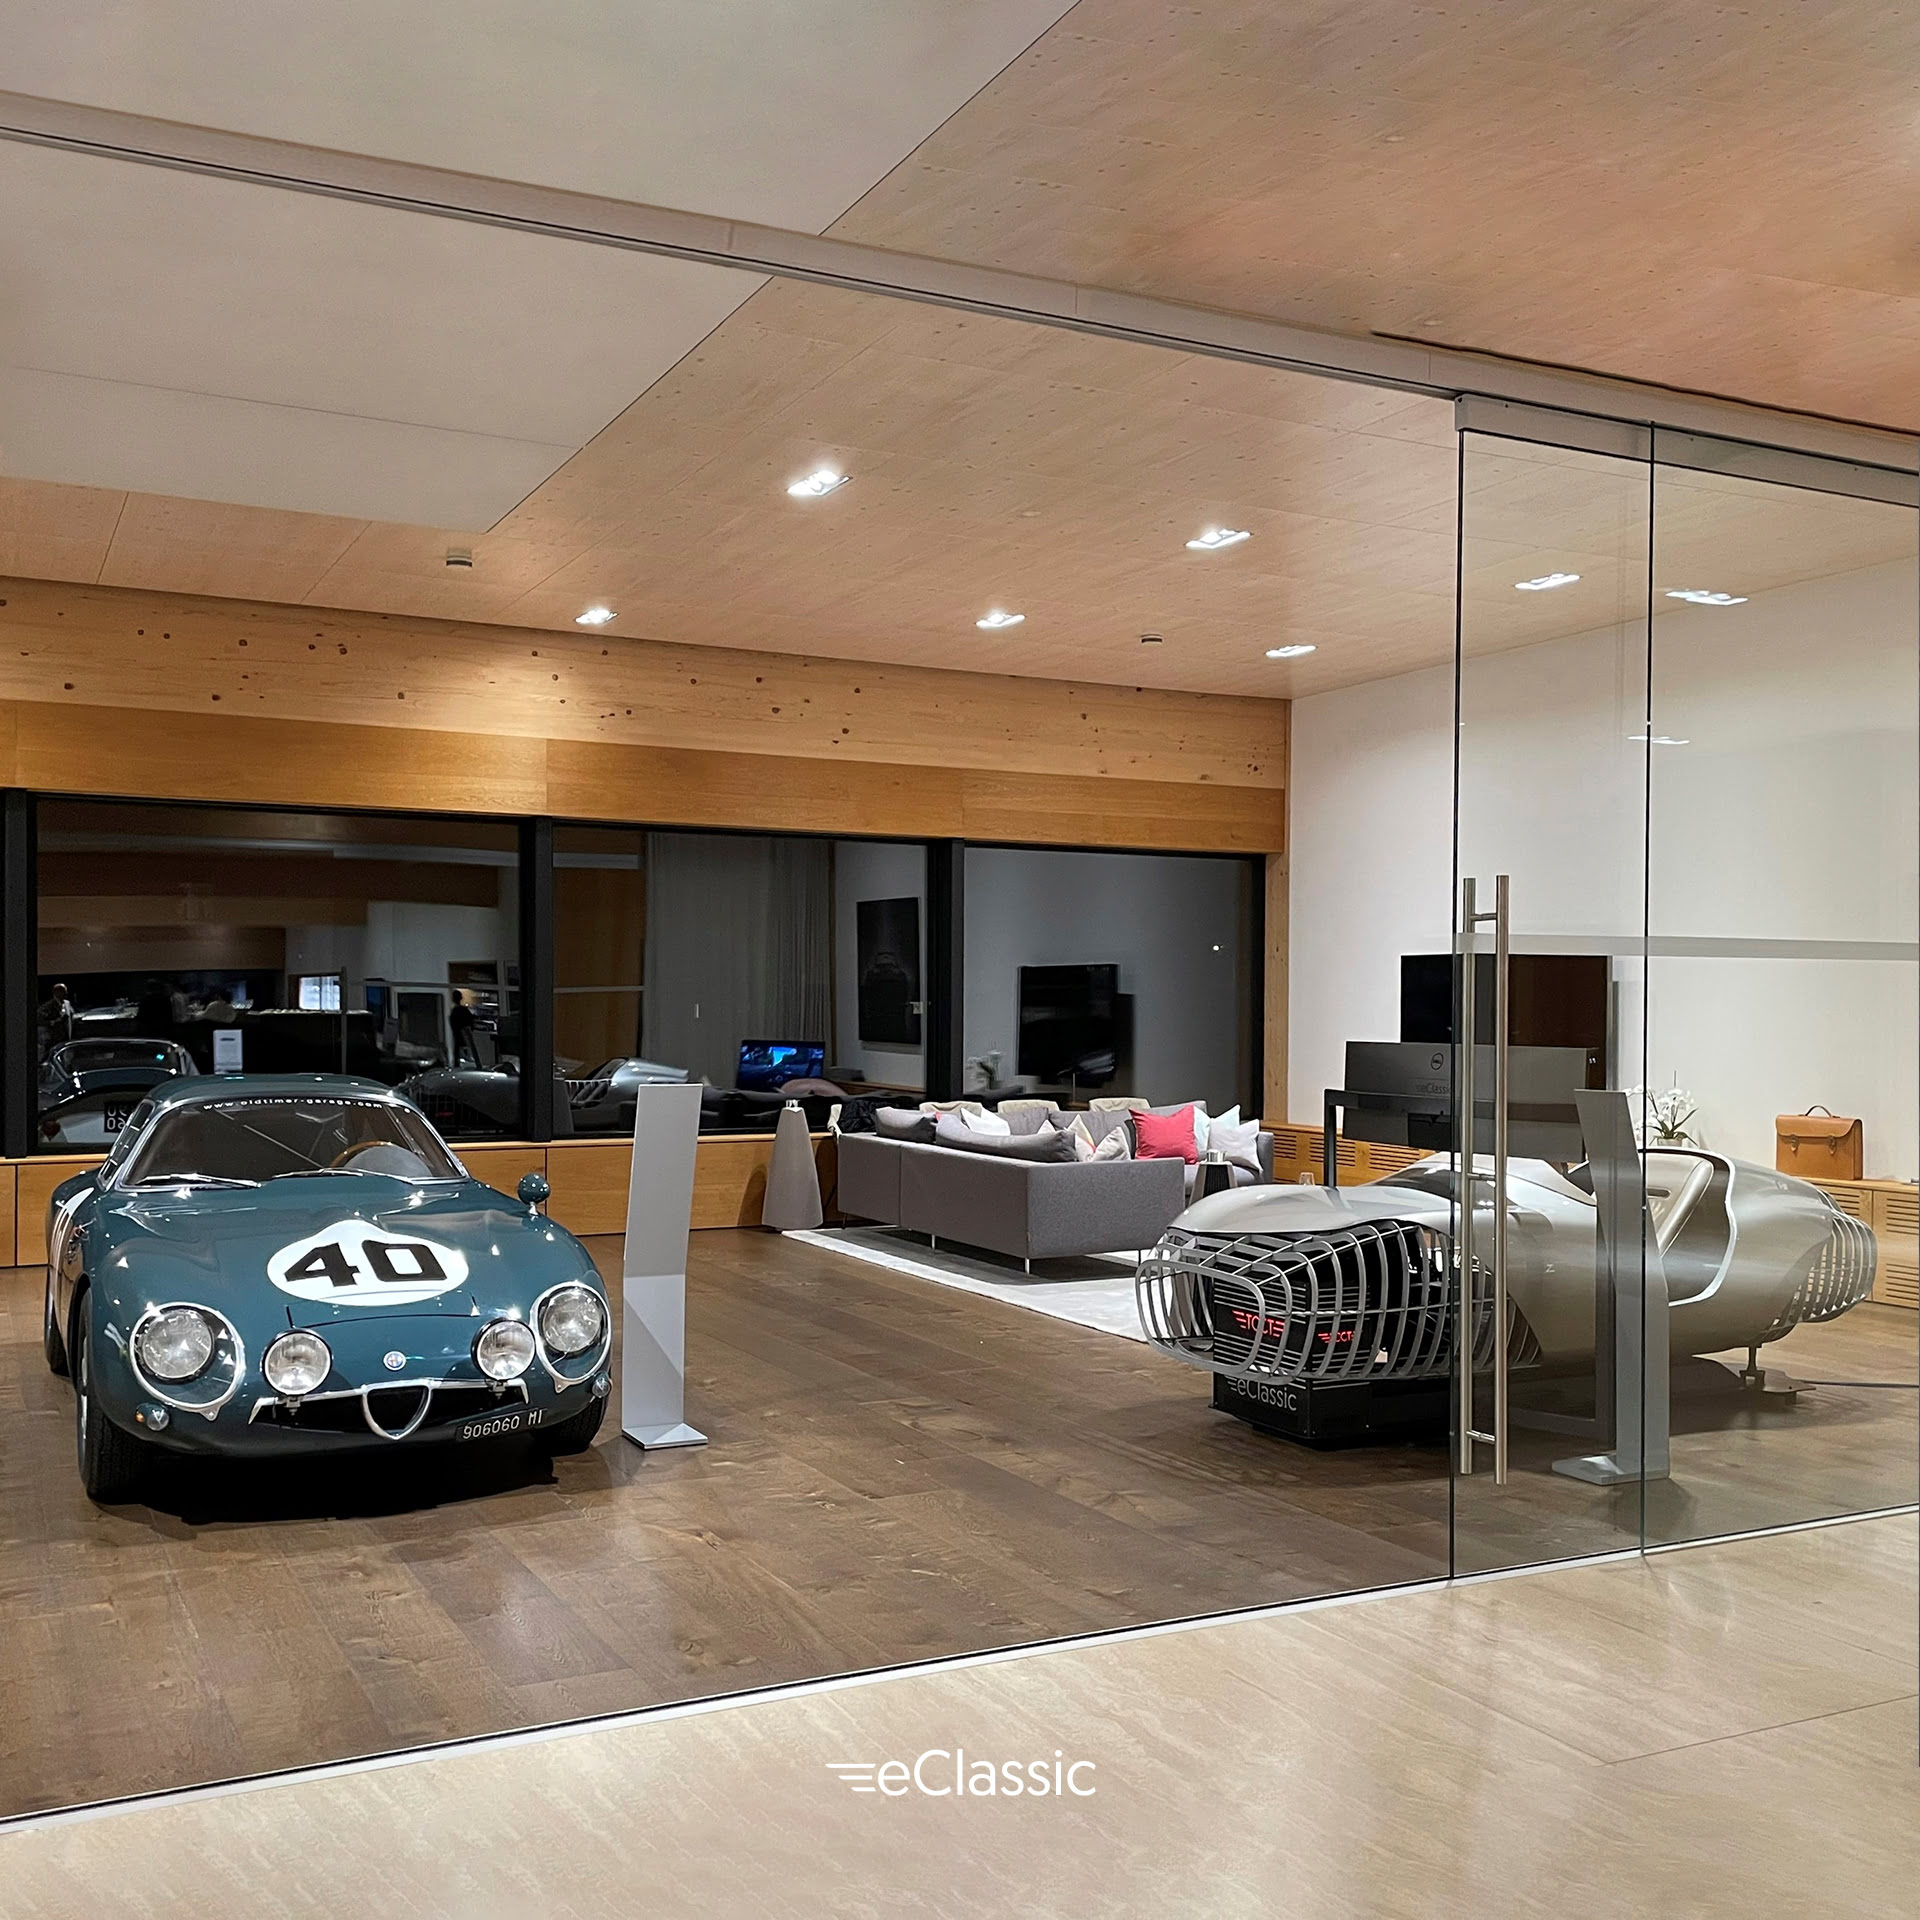 eClassic at the 1st Zagato Domus at B.I. Collection image